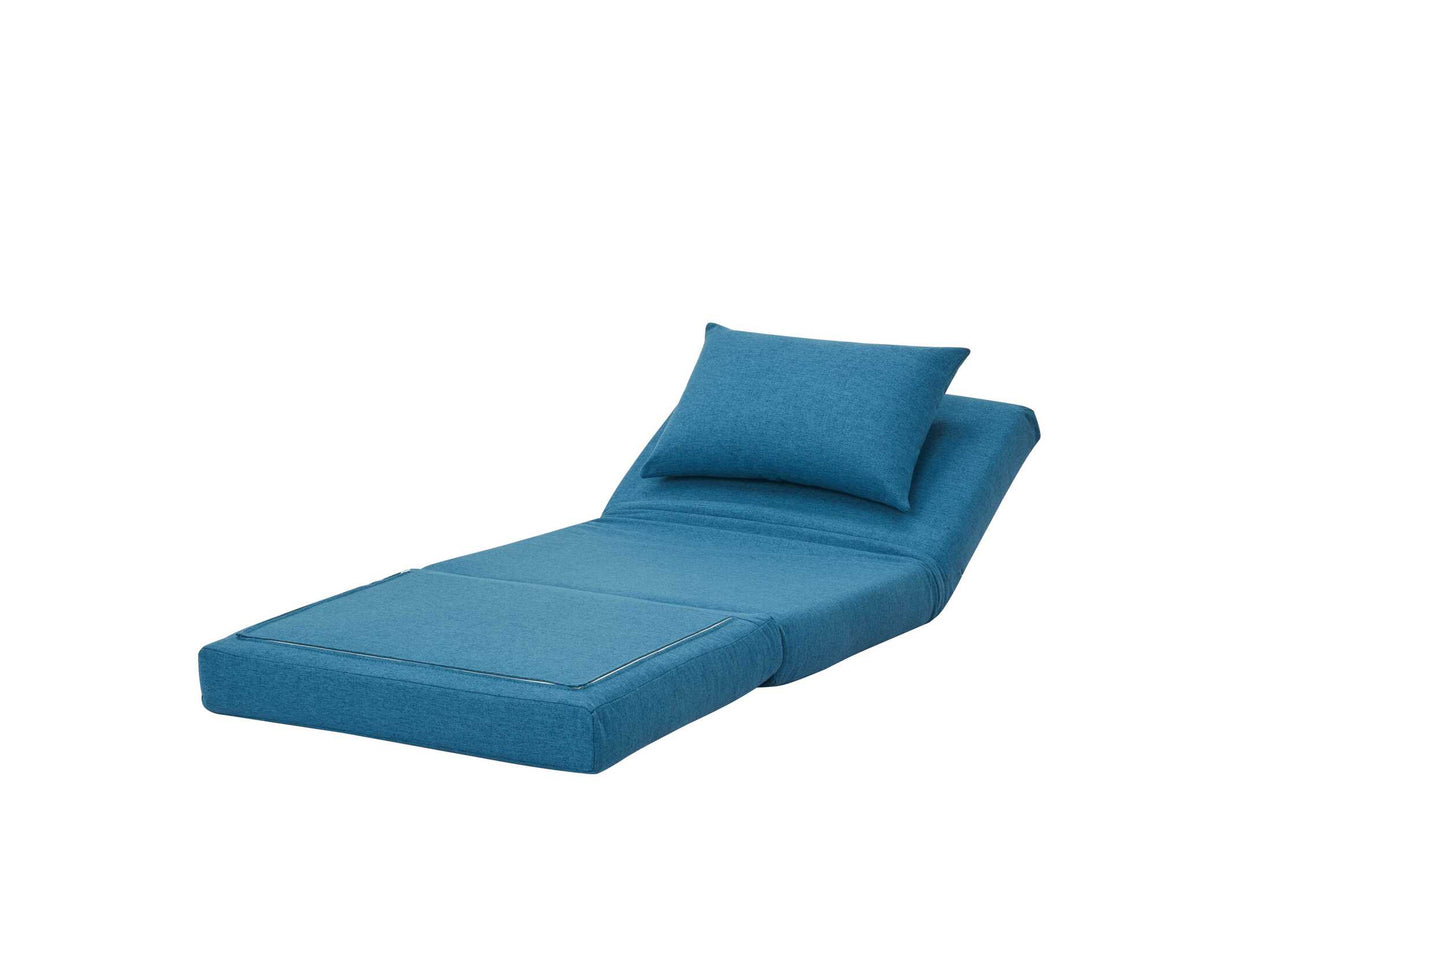 GIA Tri-Fold Convertible Sofa Bed with pillow, Blue